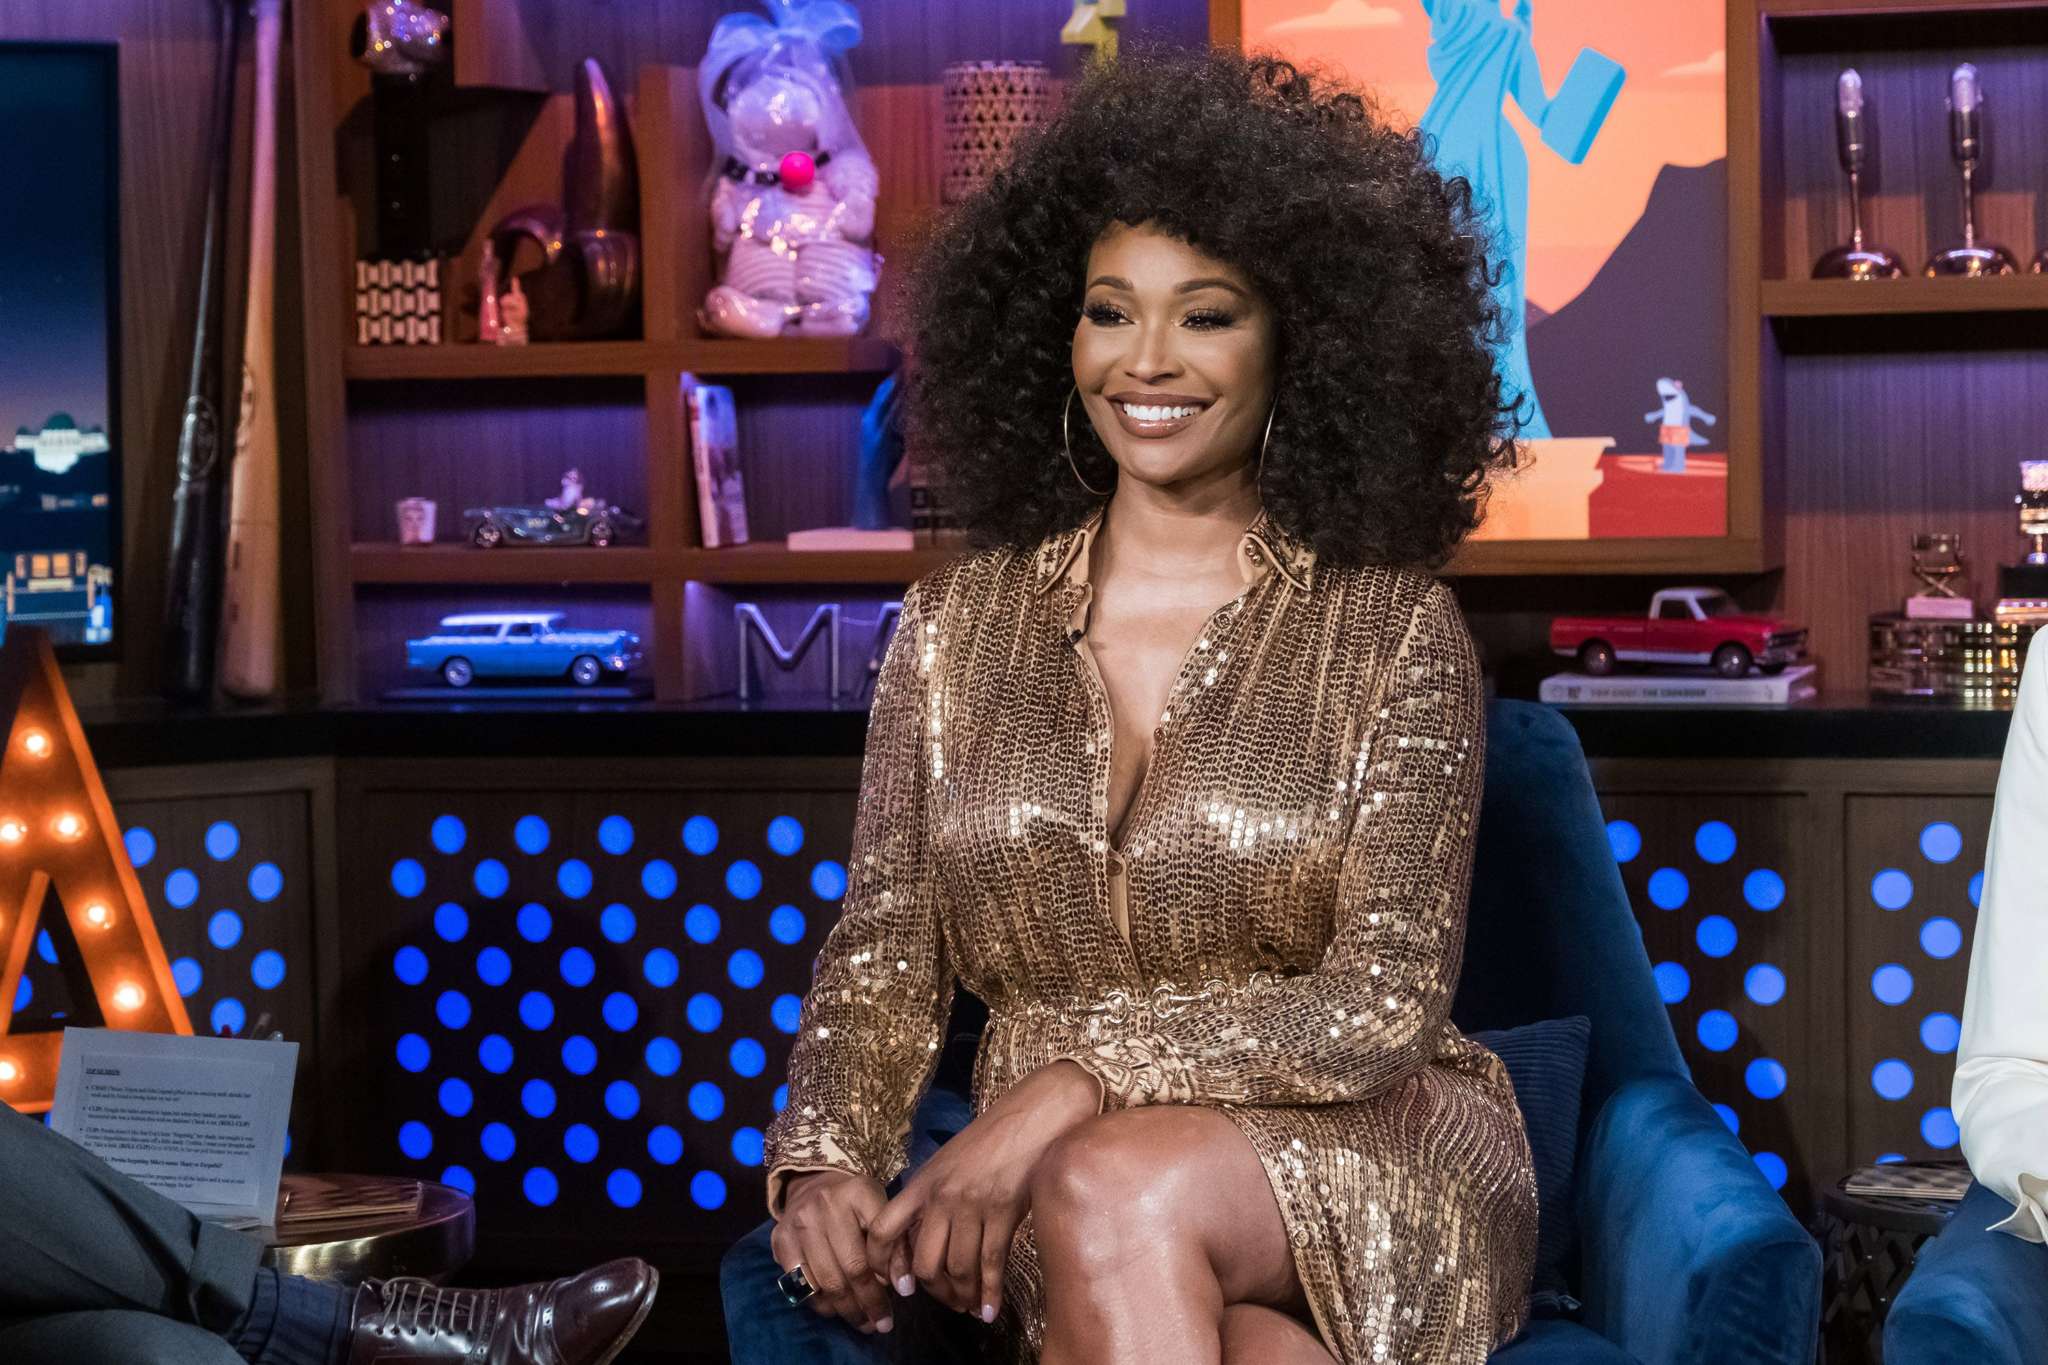 Cynthia Bailey Surprises Fans With A Giveaway - People Are Laughing Their Hearts Out Because Of Cynthia's Acting Skills